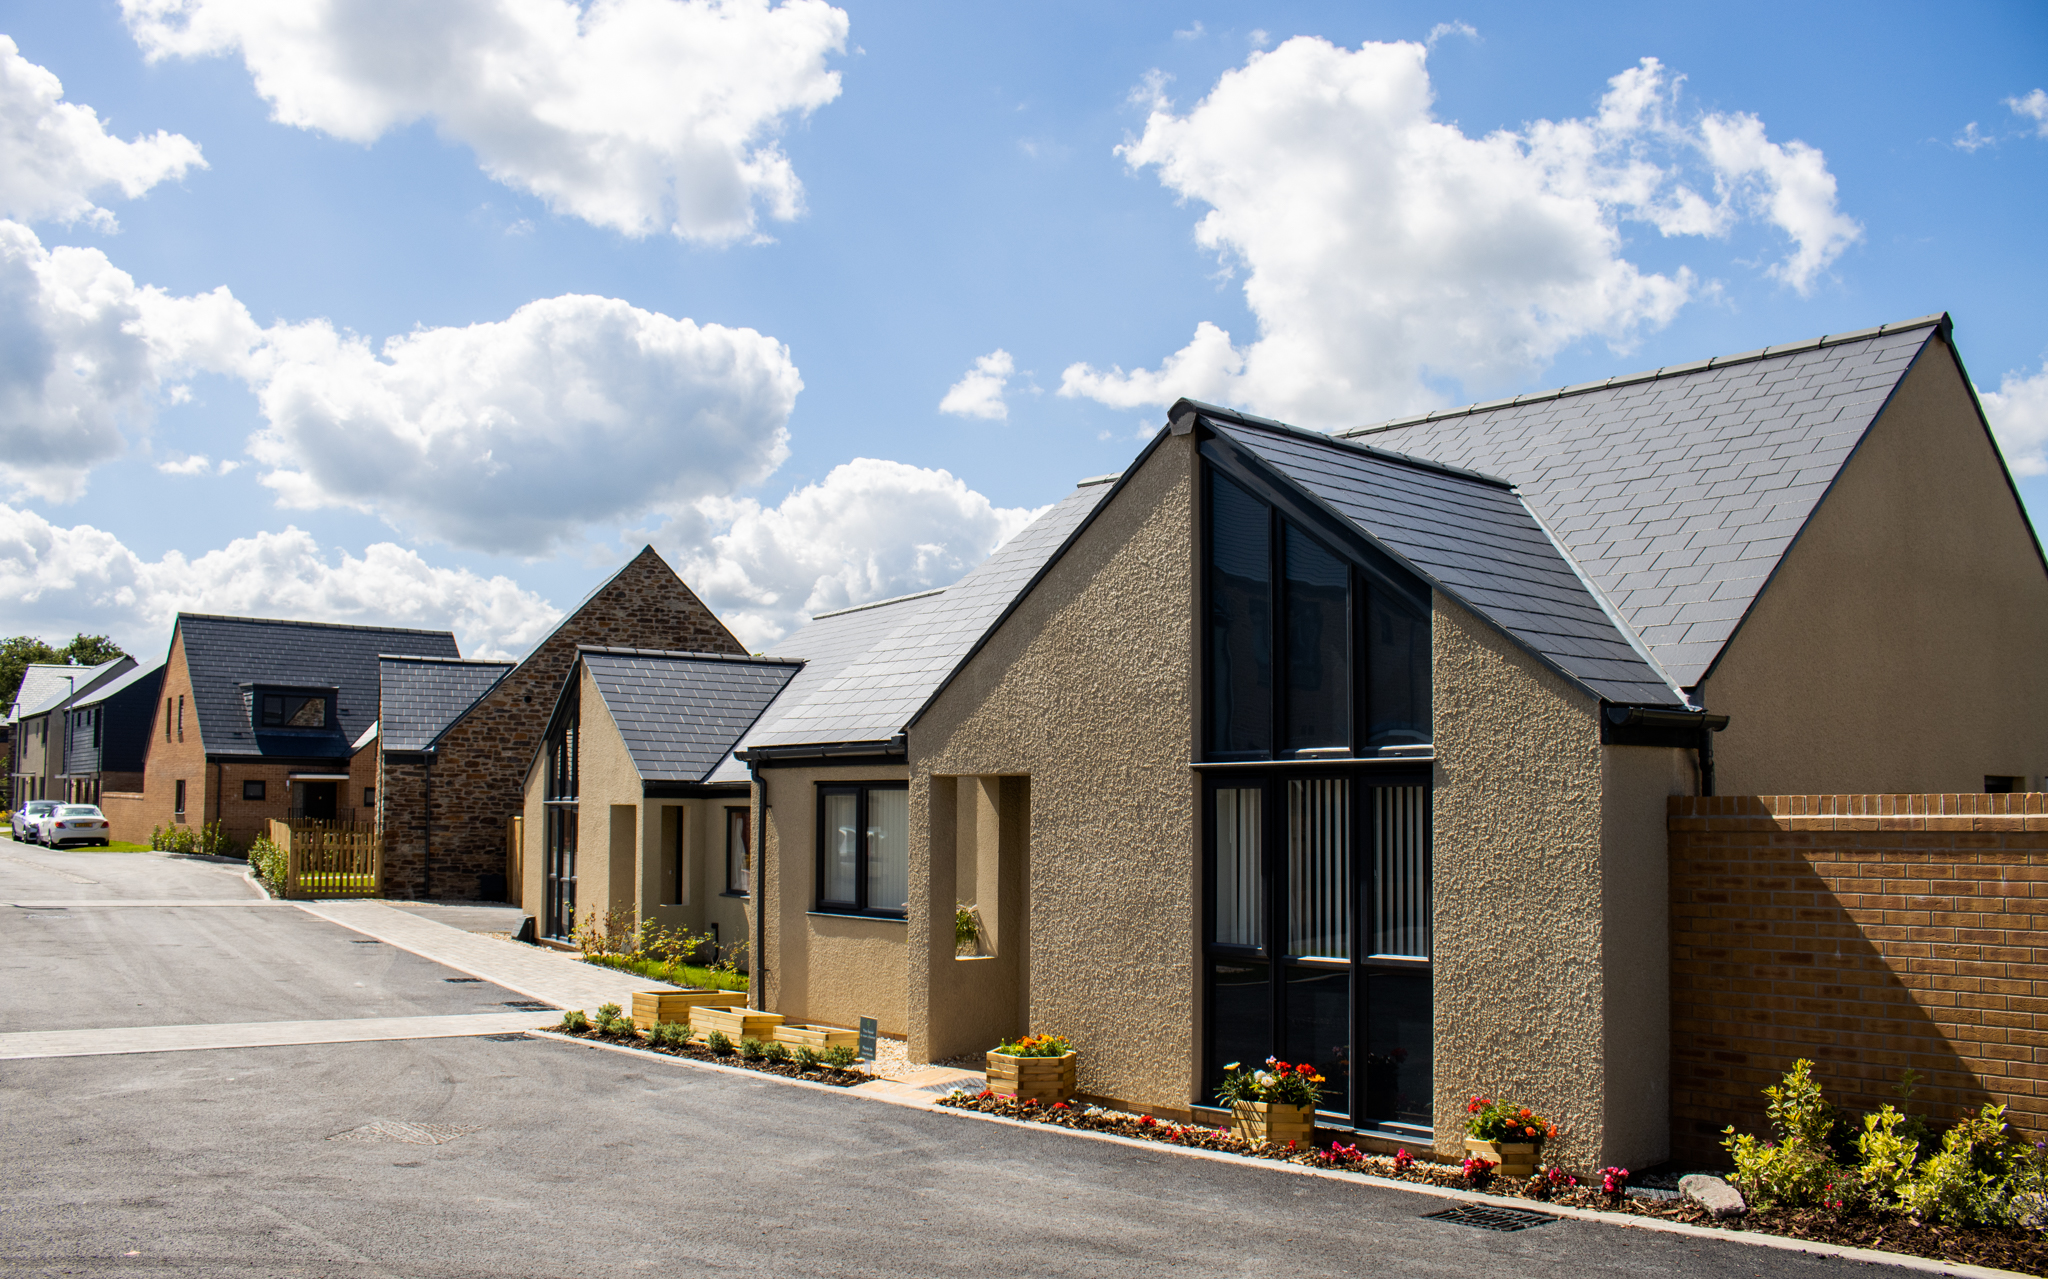 New release of bungalows at Meadowbrook development in Callington